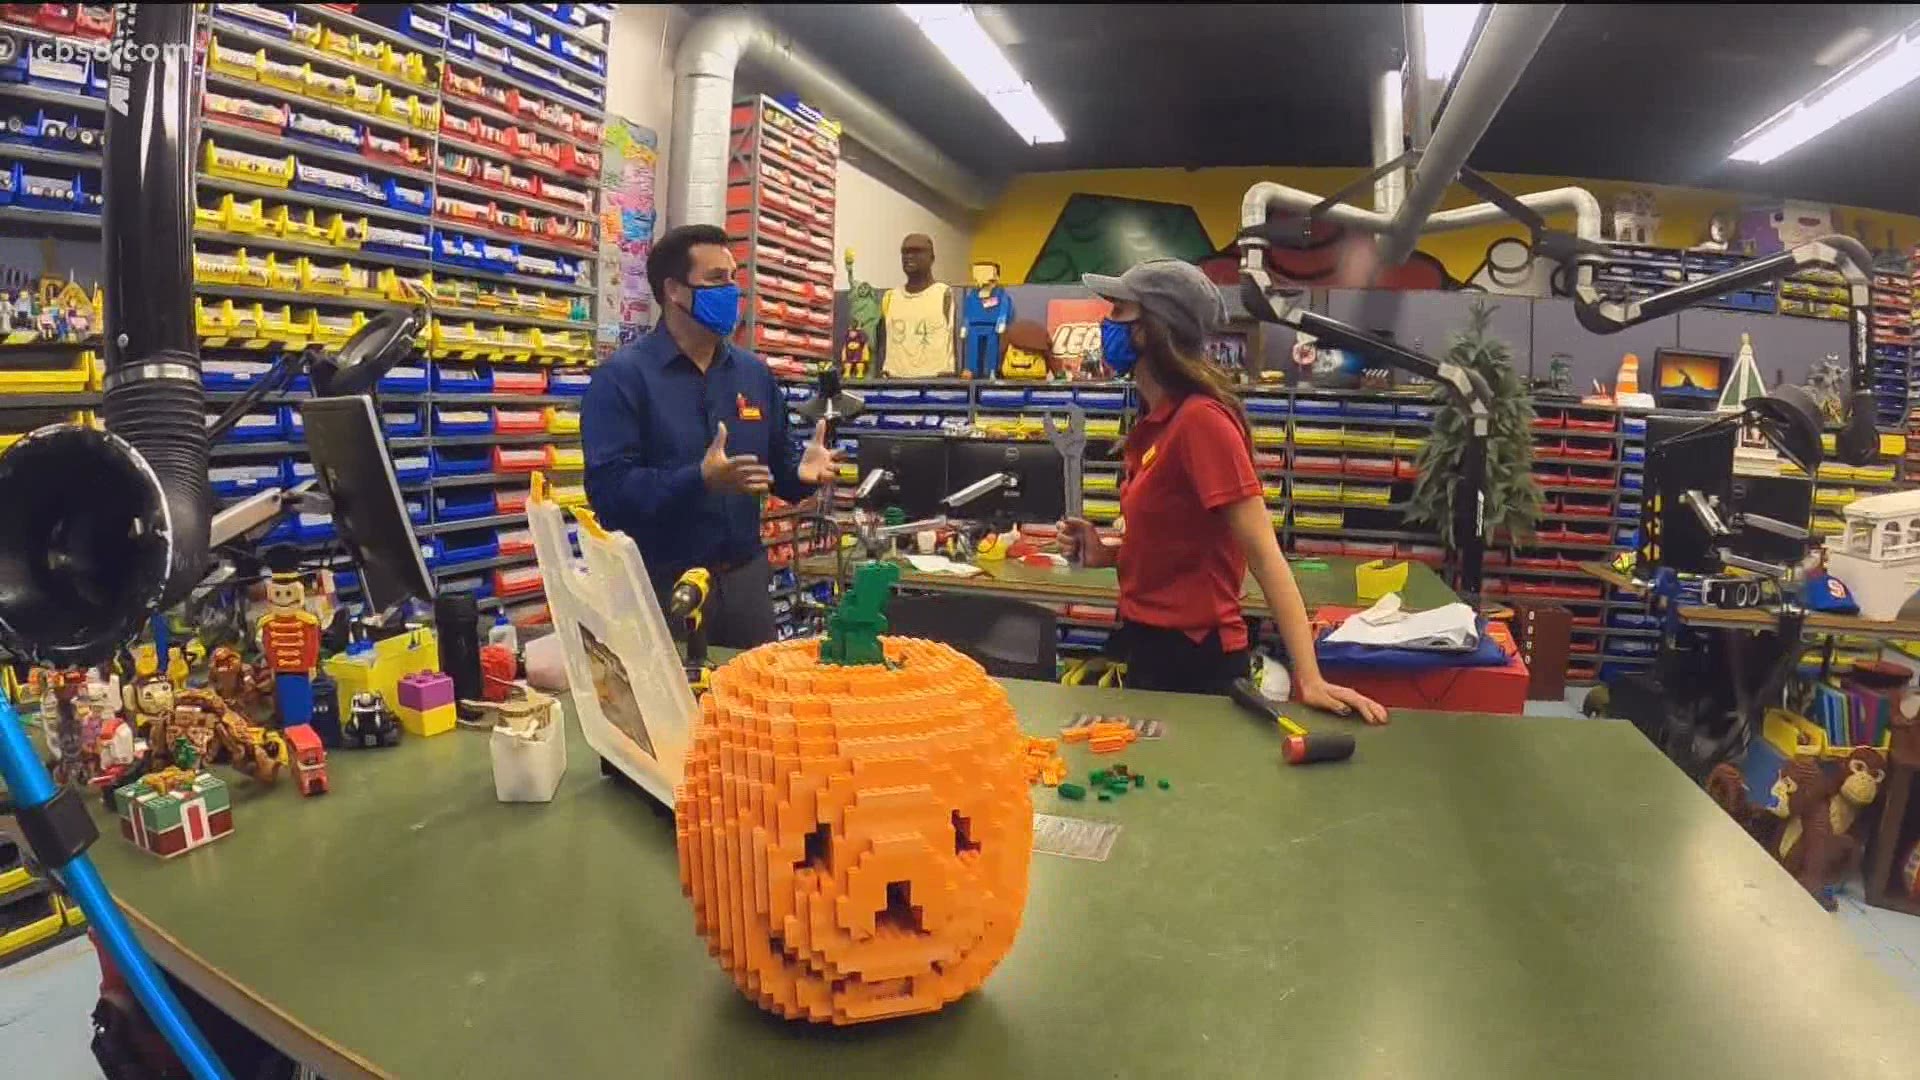 Don't let anyone tell you Halloween is canceled. It's still going to get spooky this year, and Legoland is here to help!